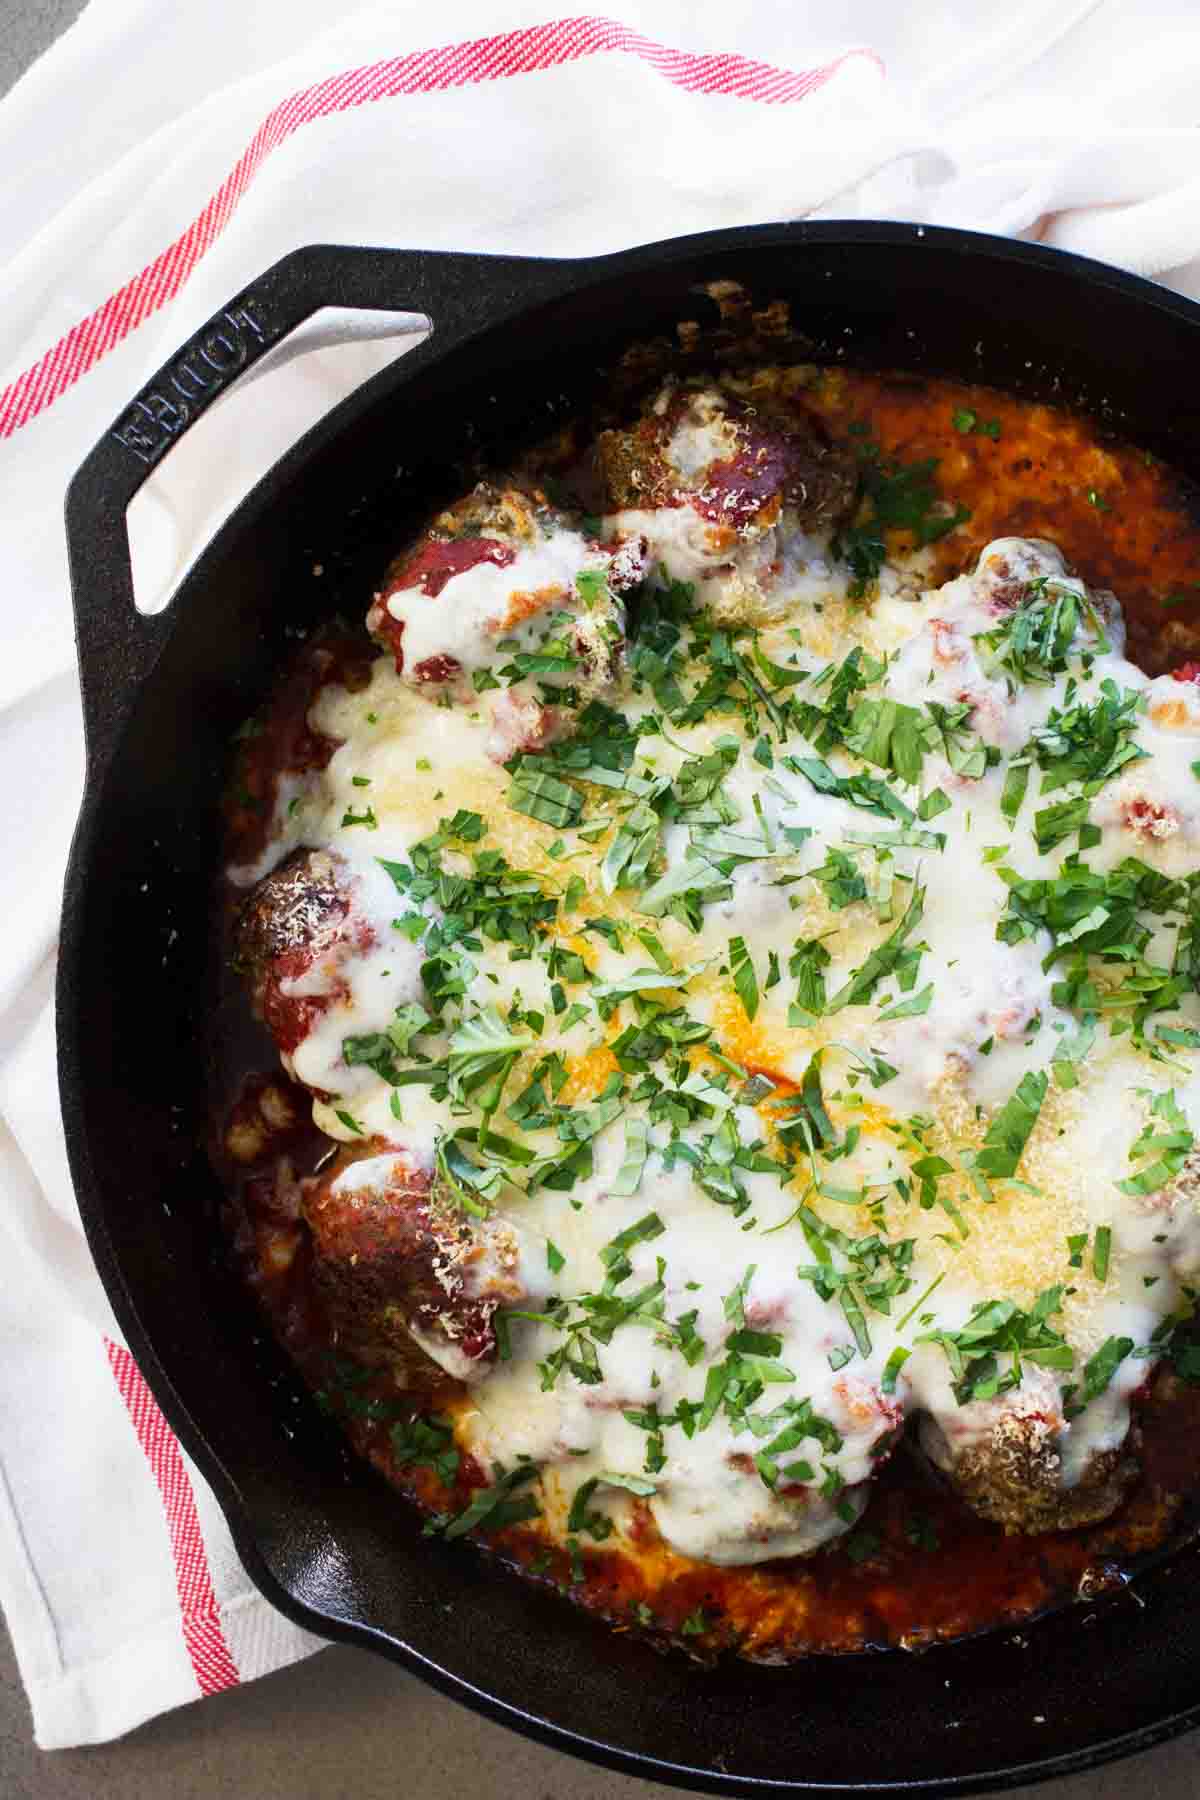 Meatball Parmesan skillet topped with mozzarella cheese.